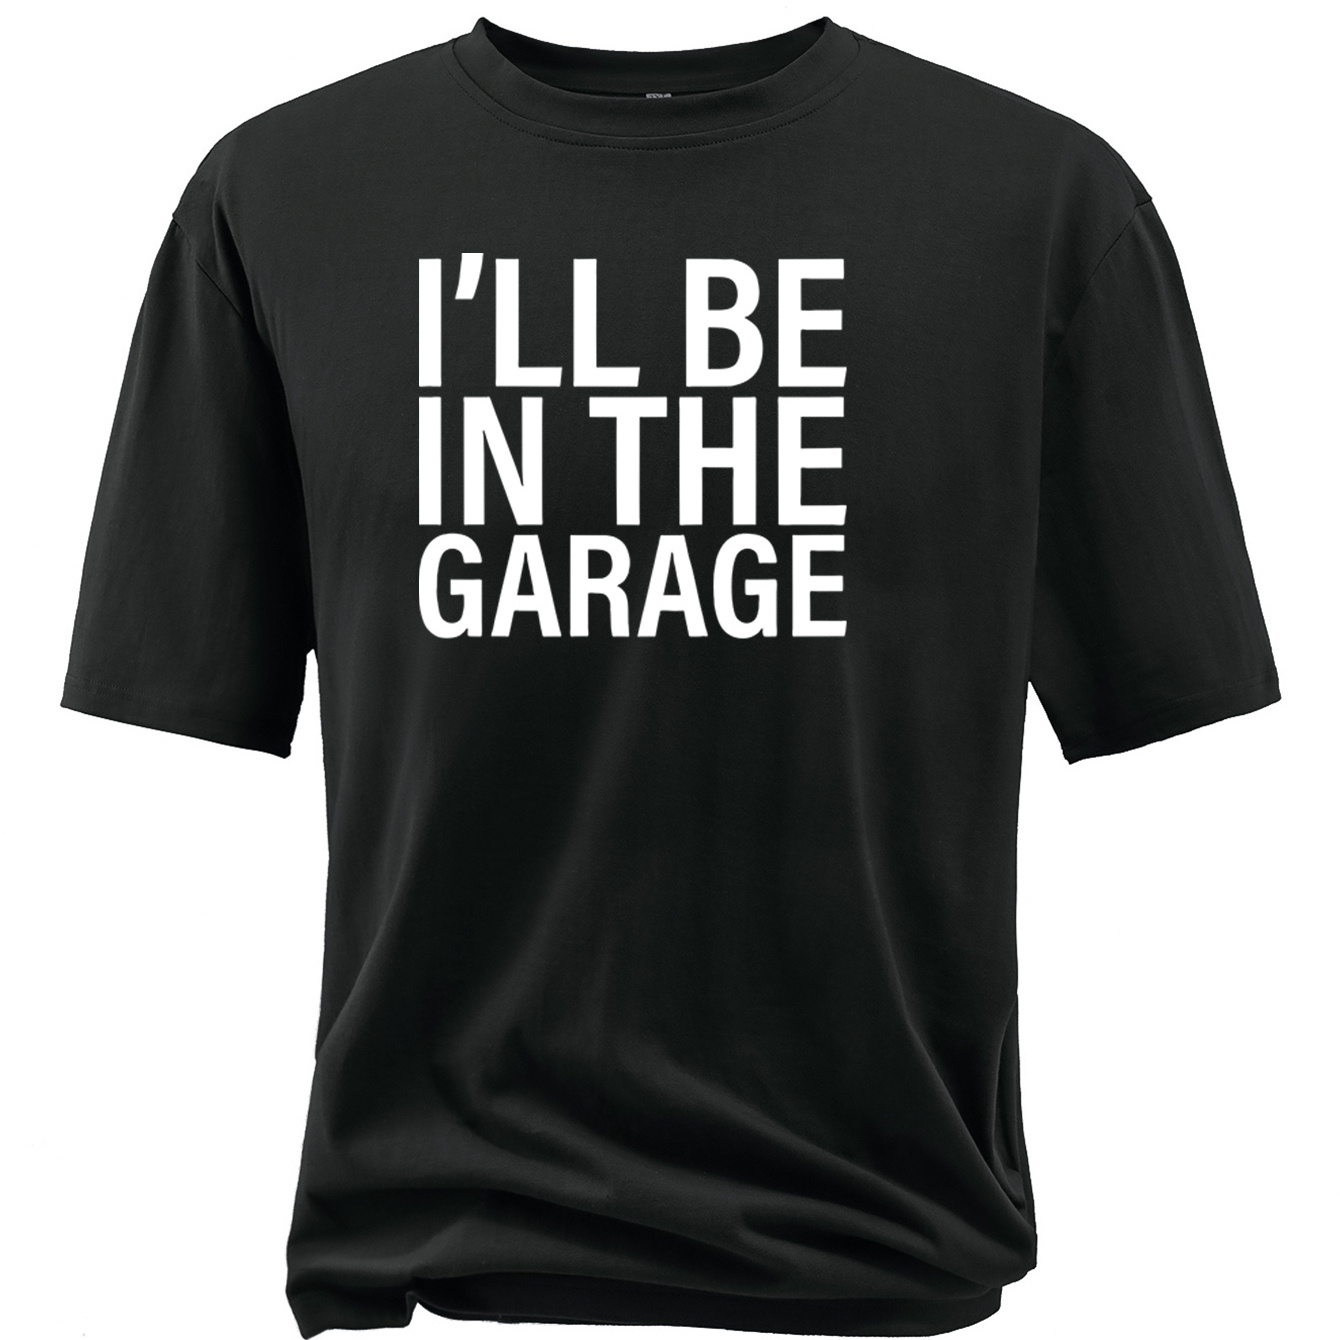 

i'll Be Inthe Garage" Alphabet Print Plus Size Men's Crew Neck Short Sleeve Cotton T-shirt For Summer Daily Wear And Holiday Resorts